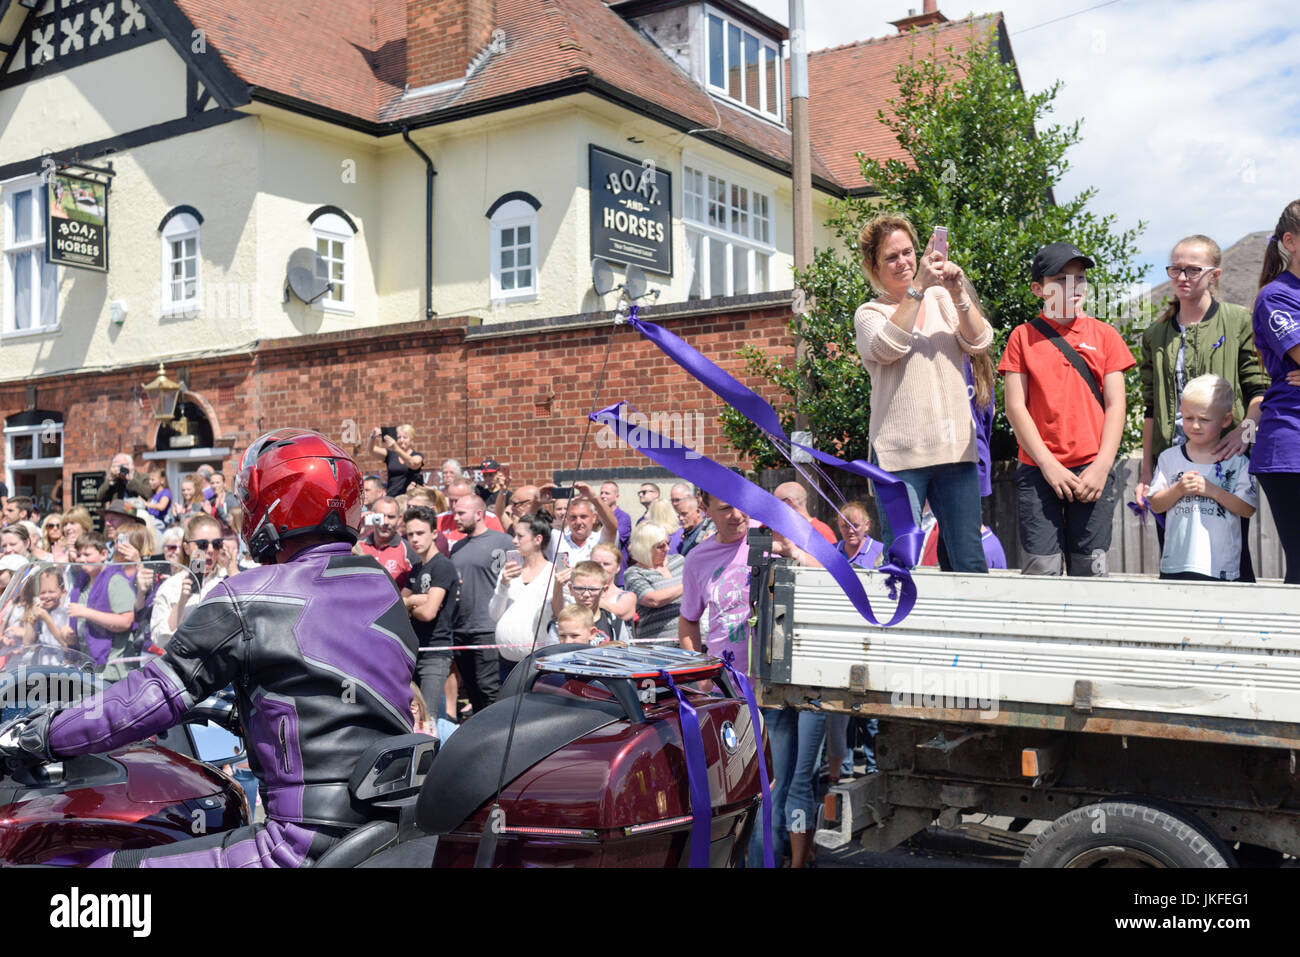 Beeston, Nottinghamshire, UK. 23rd July 2017. Nottinghamshire bikers’ group, Nottz Bikerz held a charity motorcycle run for Owen Jenkins.Owen drowned in the river Trent trying to save a young girl who was in trouble in the water.Thousands of motorcyclist turn up along with members of the public and Owens family members. Credit: Ian Francis/Alamy Live News Stock Photo